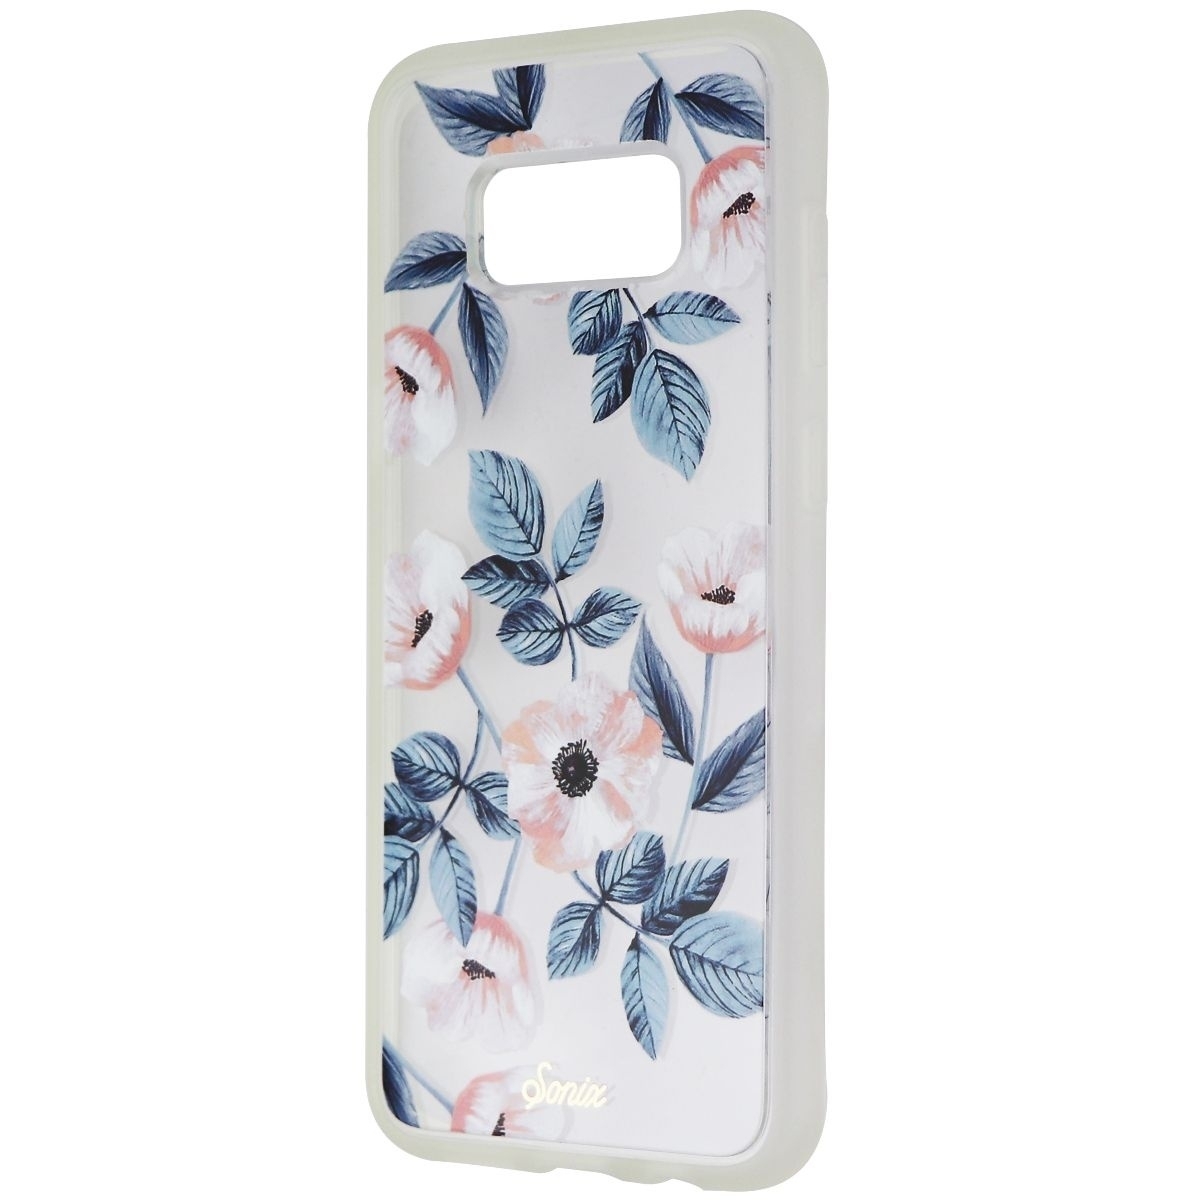 Sonix Clear Coat Series Case For Galaxy (S8+) - Vintage Floral / Clear